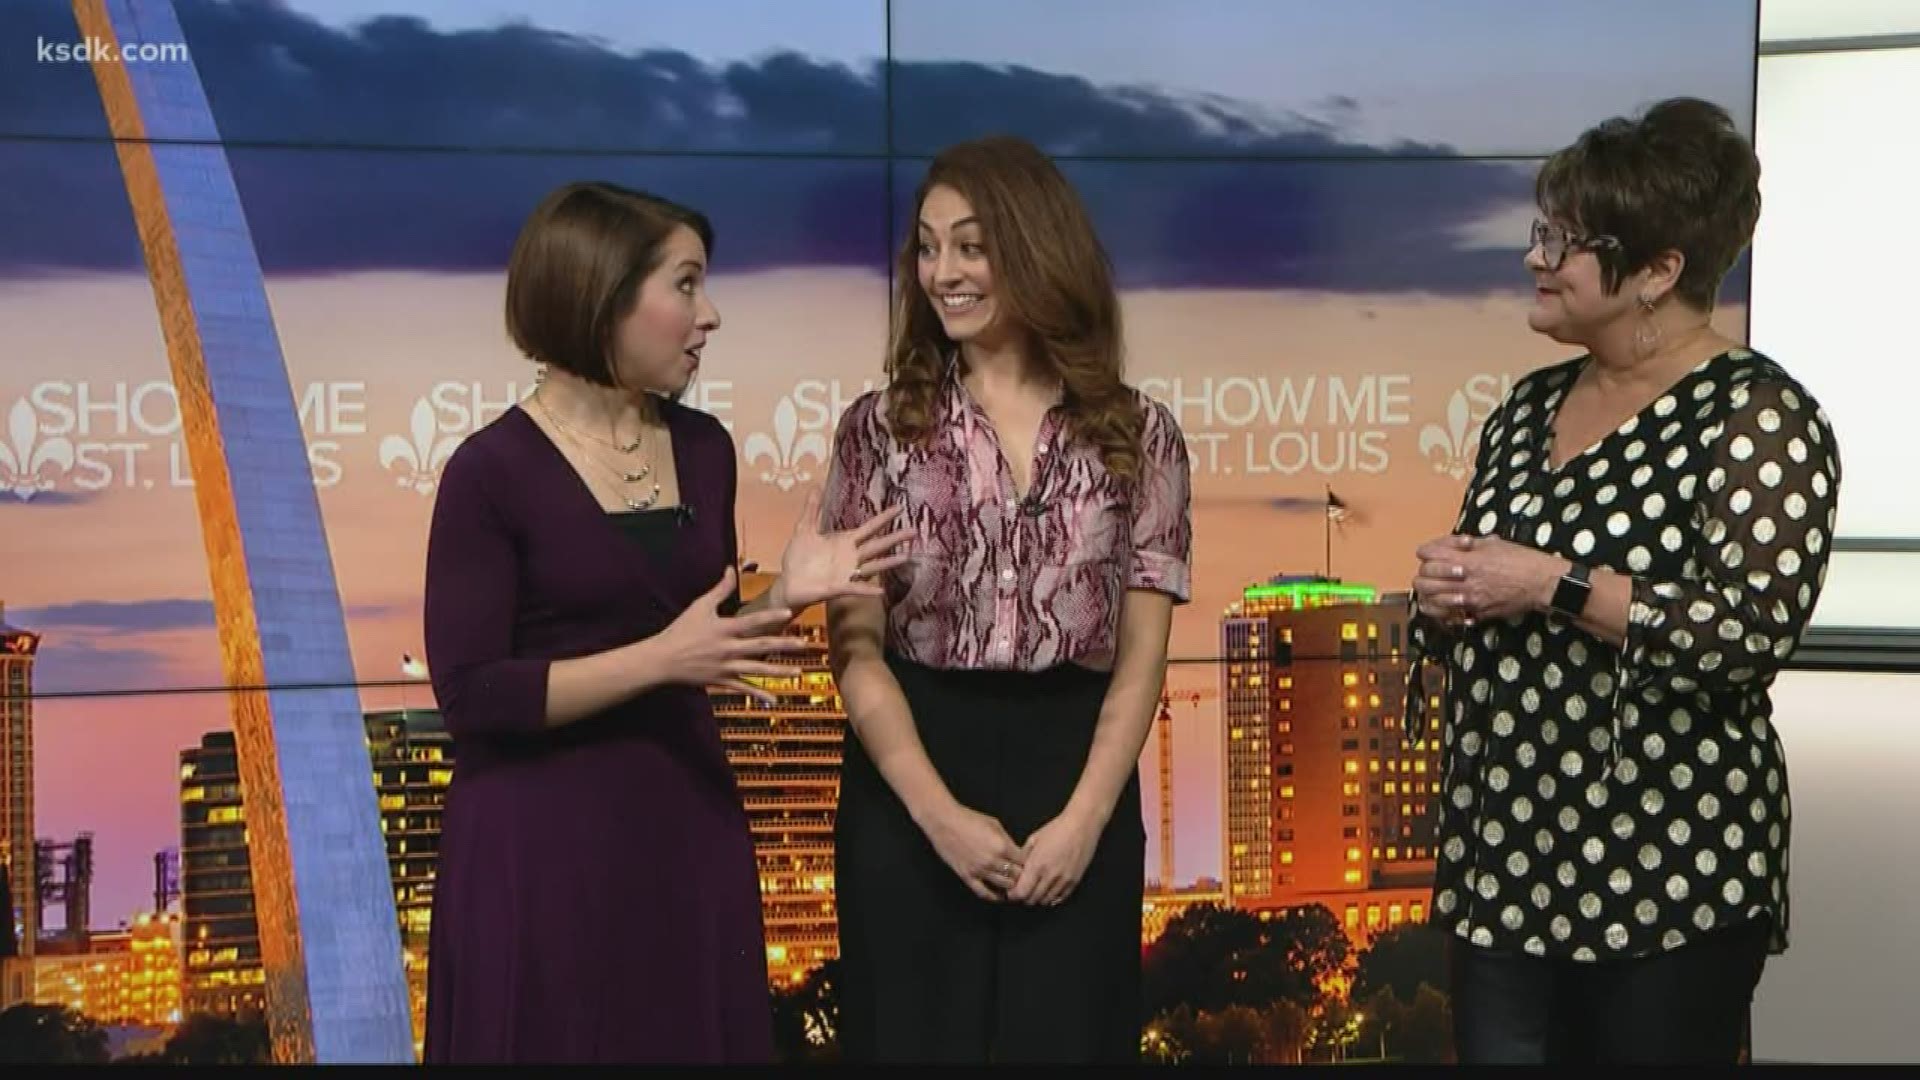 Find out how Macy’s can help with your holiday shopping with a free personal stylist!